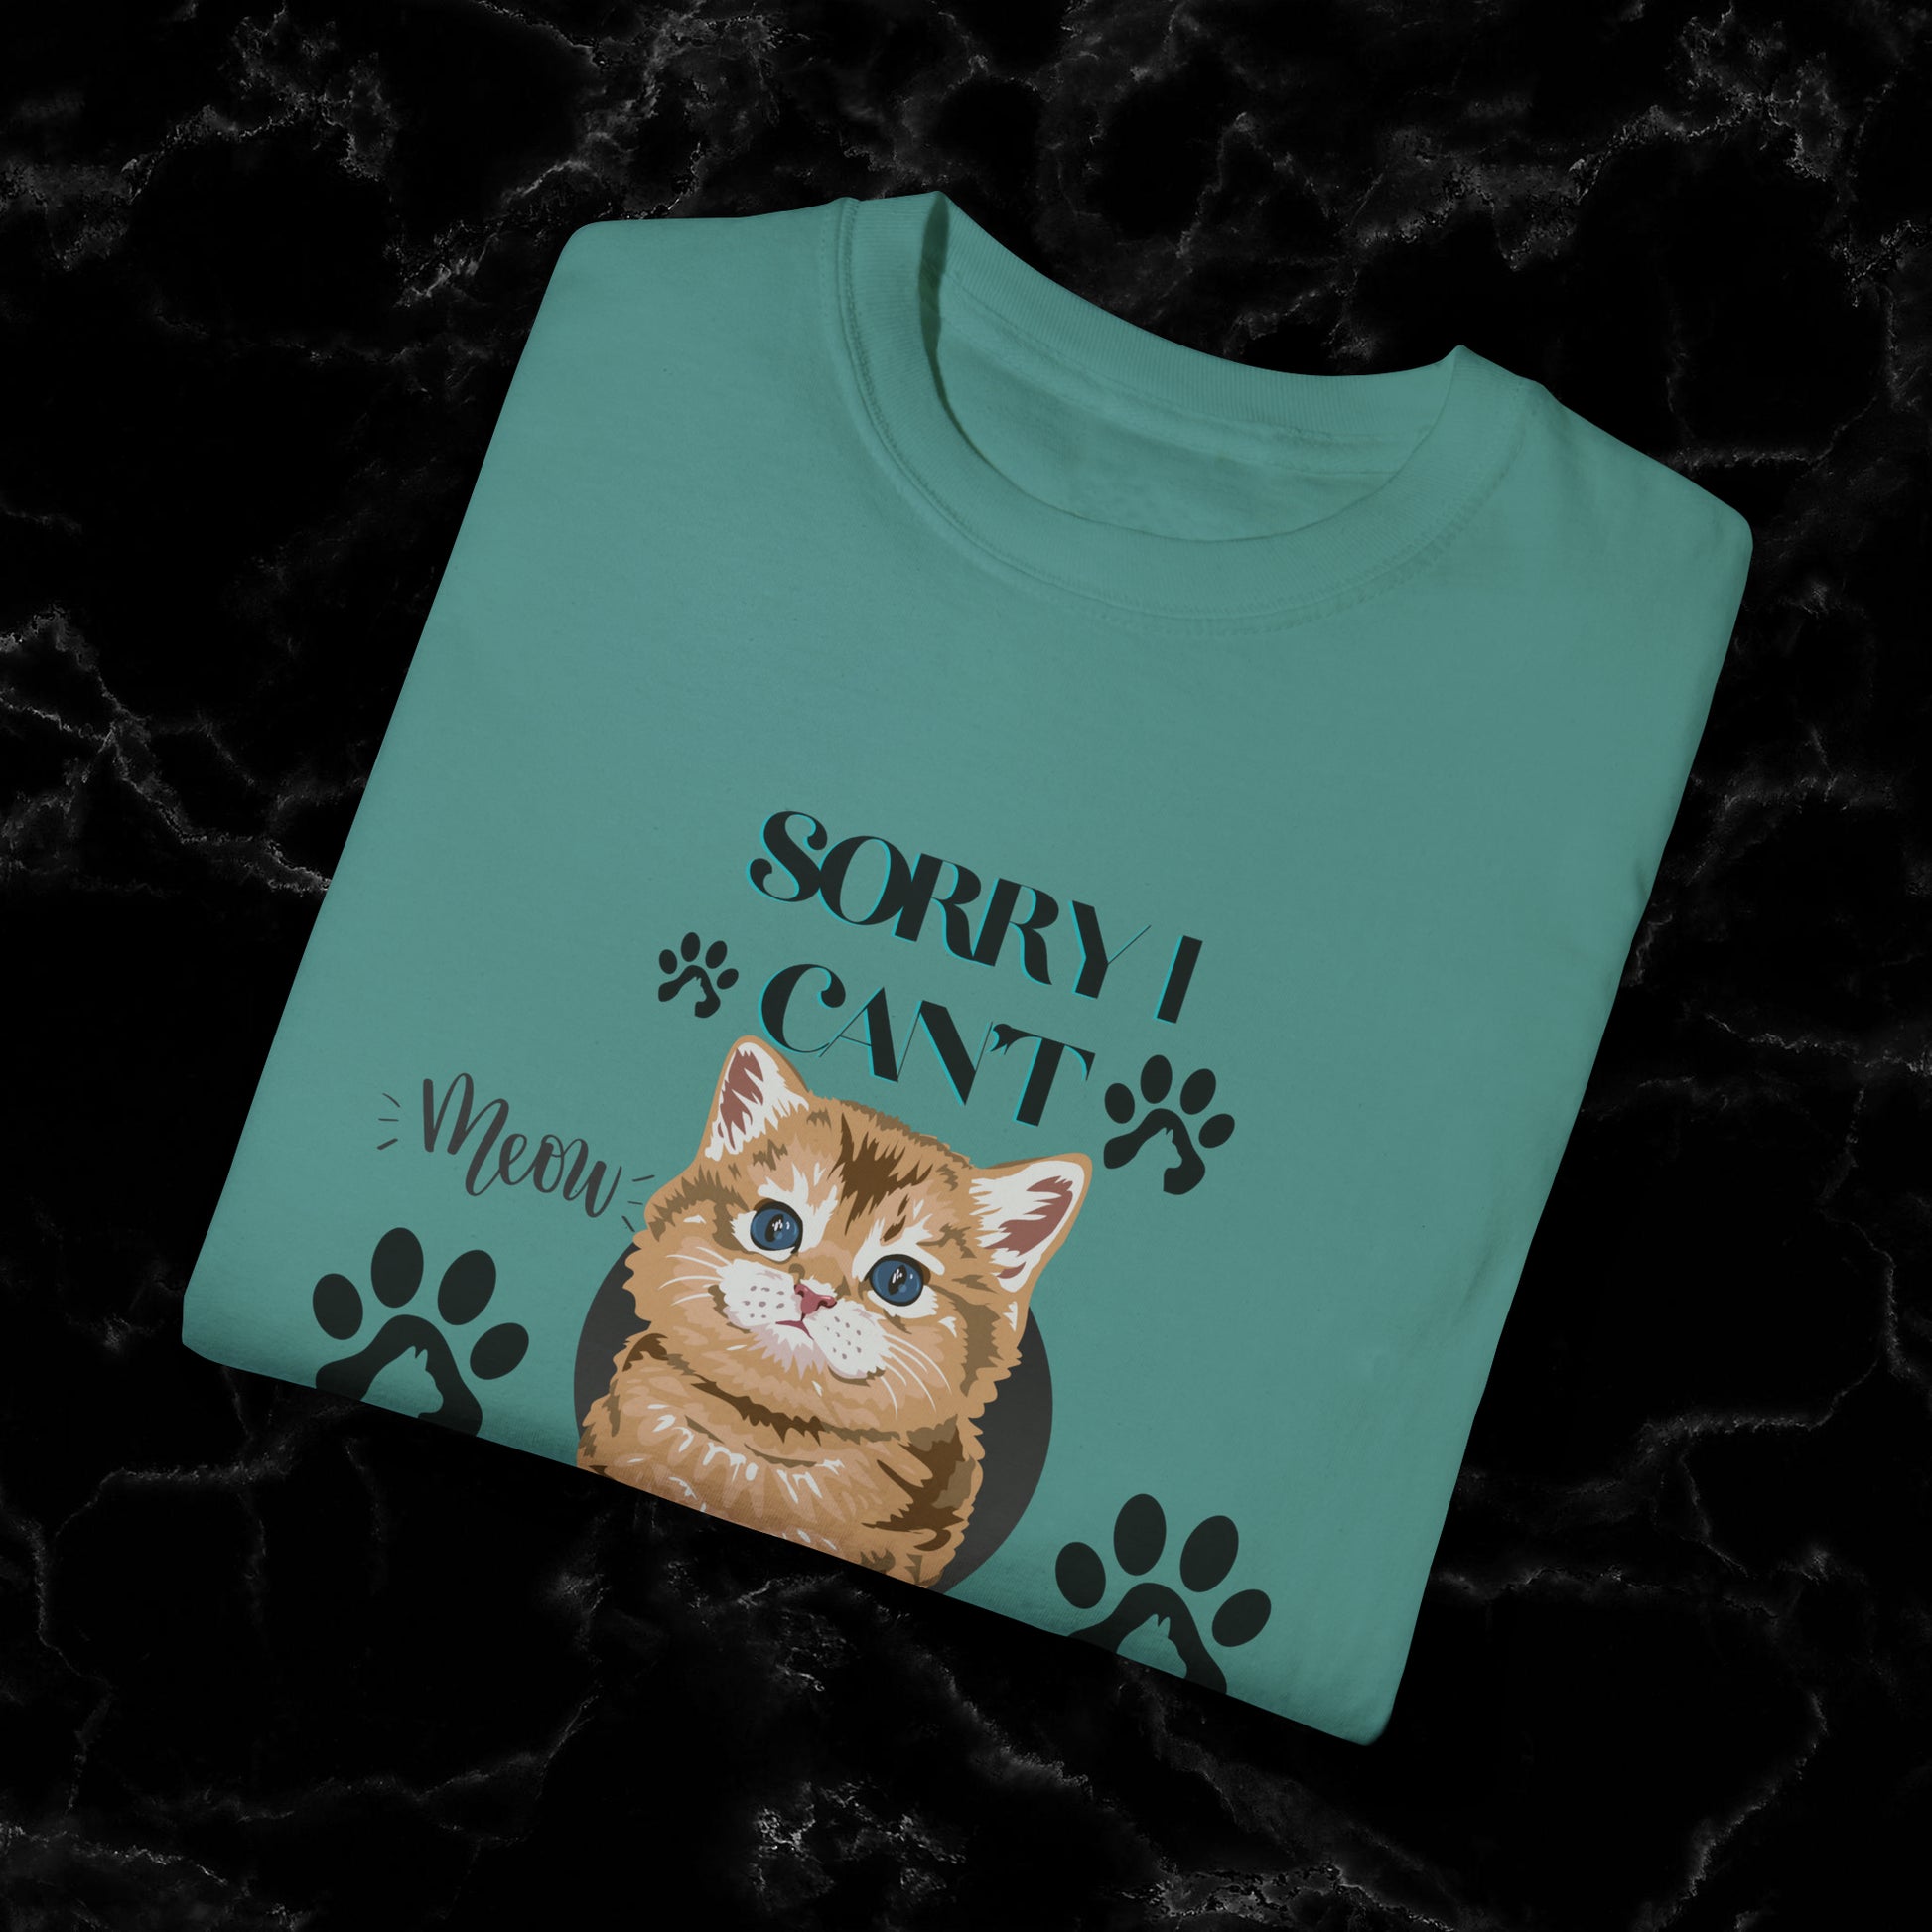 Sorry I Can't, My Cat Needs Me T-Shirt - Perfect Gift for Cat Moms and Animal Lovers T-Shirt   